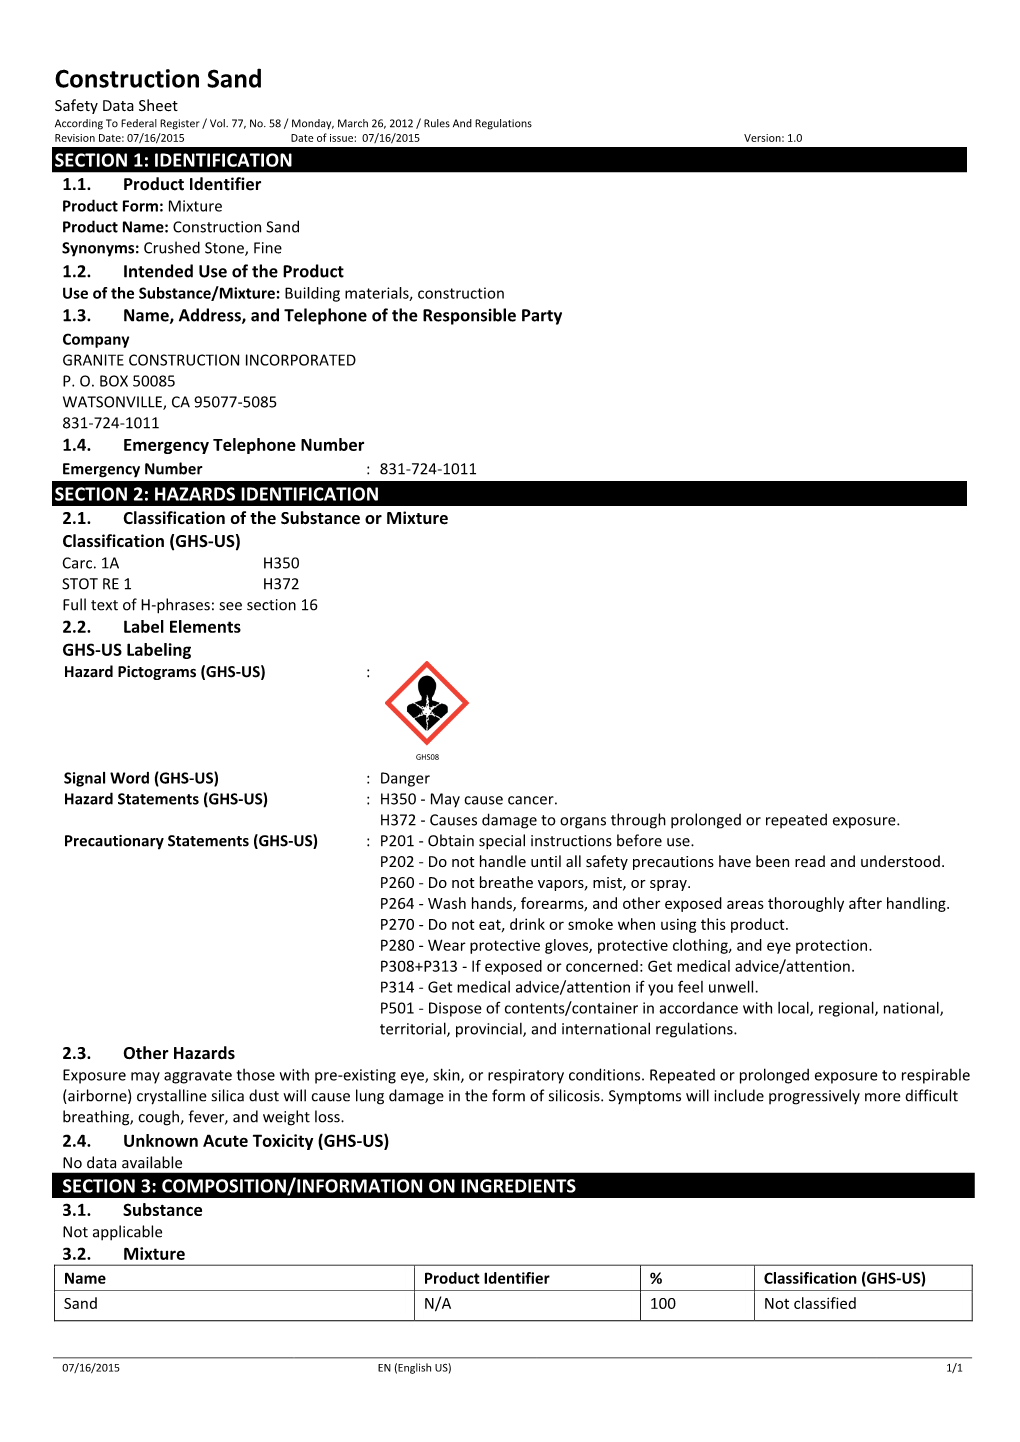 Construction Sand Safety Data Sheet According to Federal Register / Vol